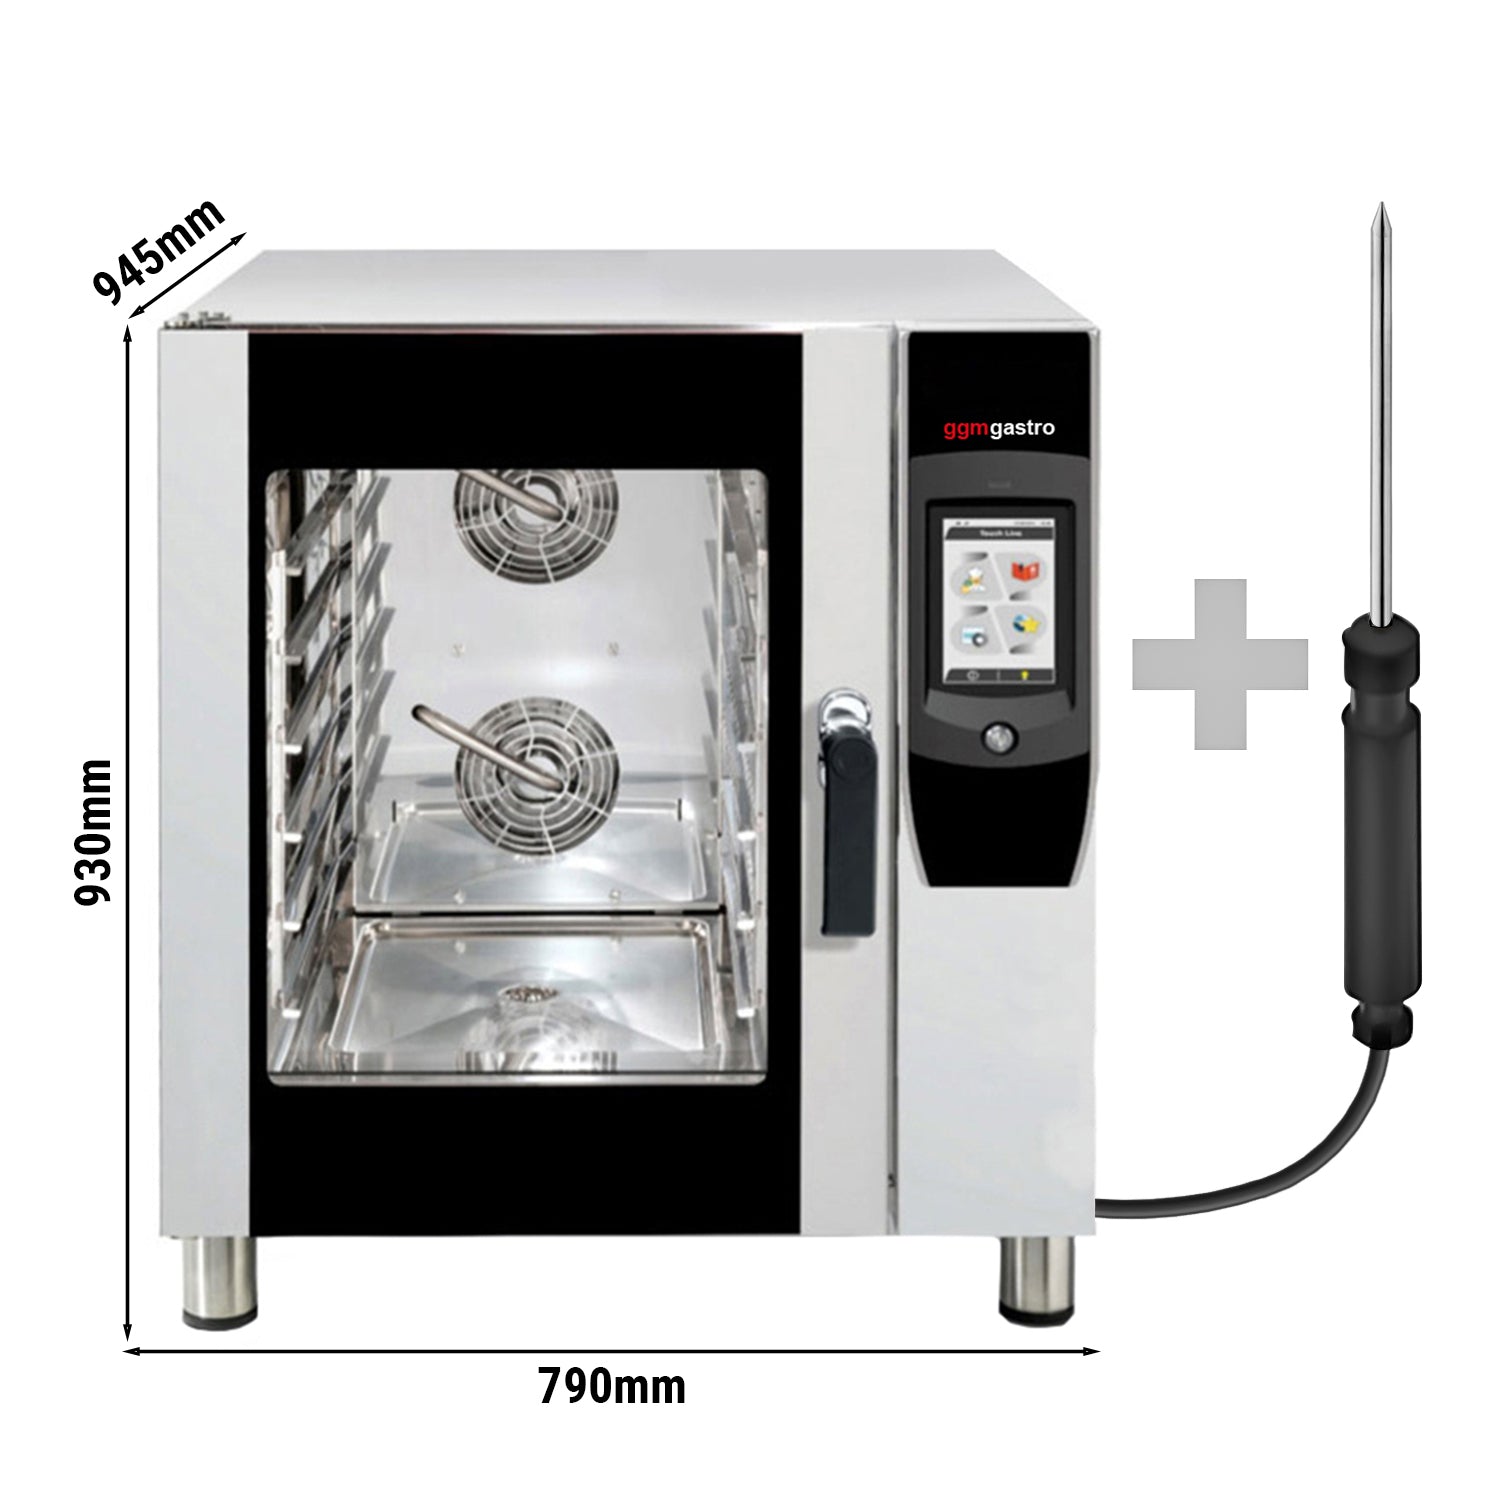 Digital convection oven - 7x GN 1/1 - incl. self-cleaning function